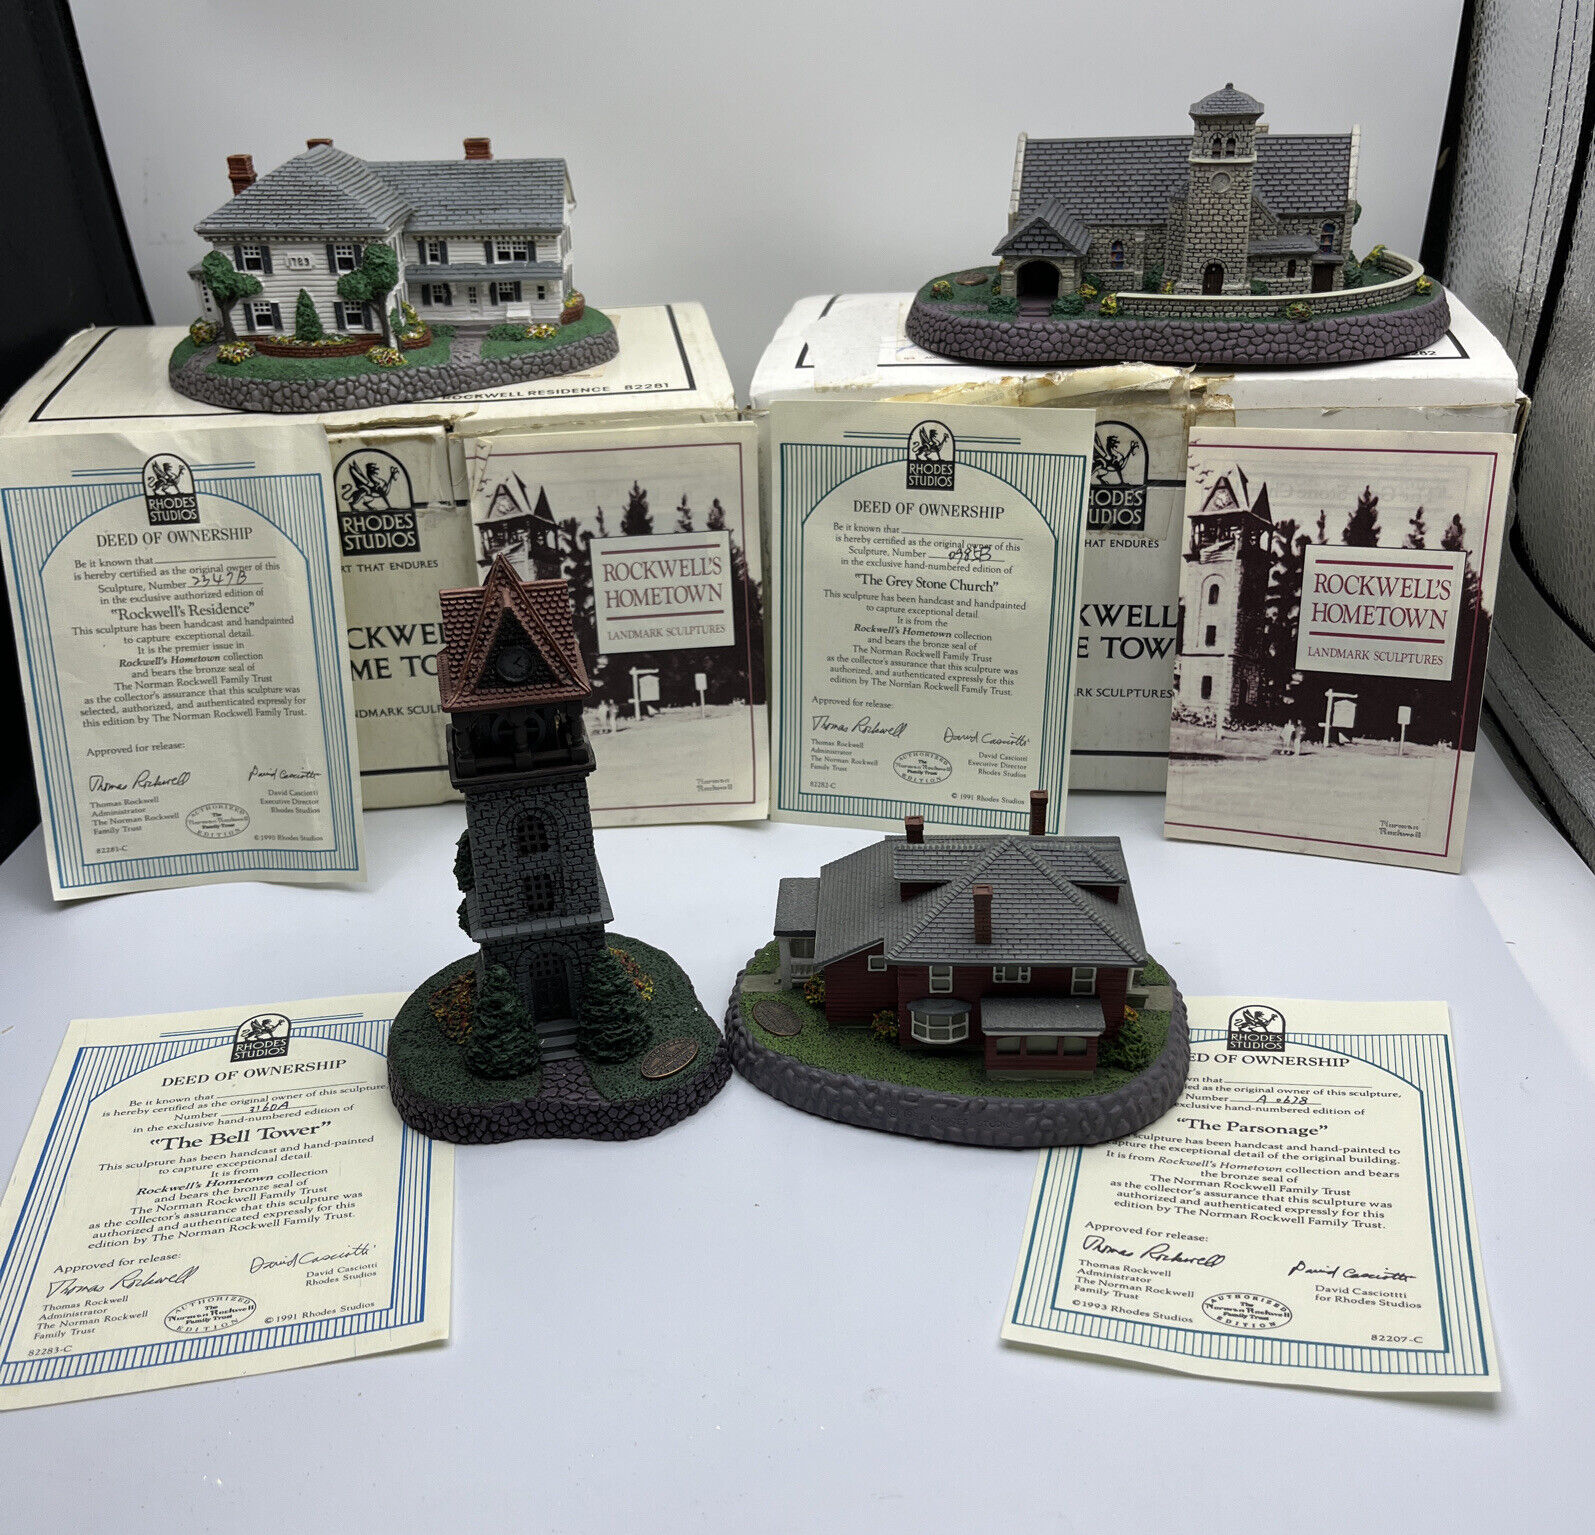 Norman Rockwell's Hometown & Main Street Residence-Parsonage-Lot of 4 Buildings